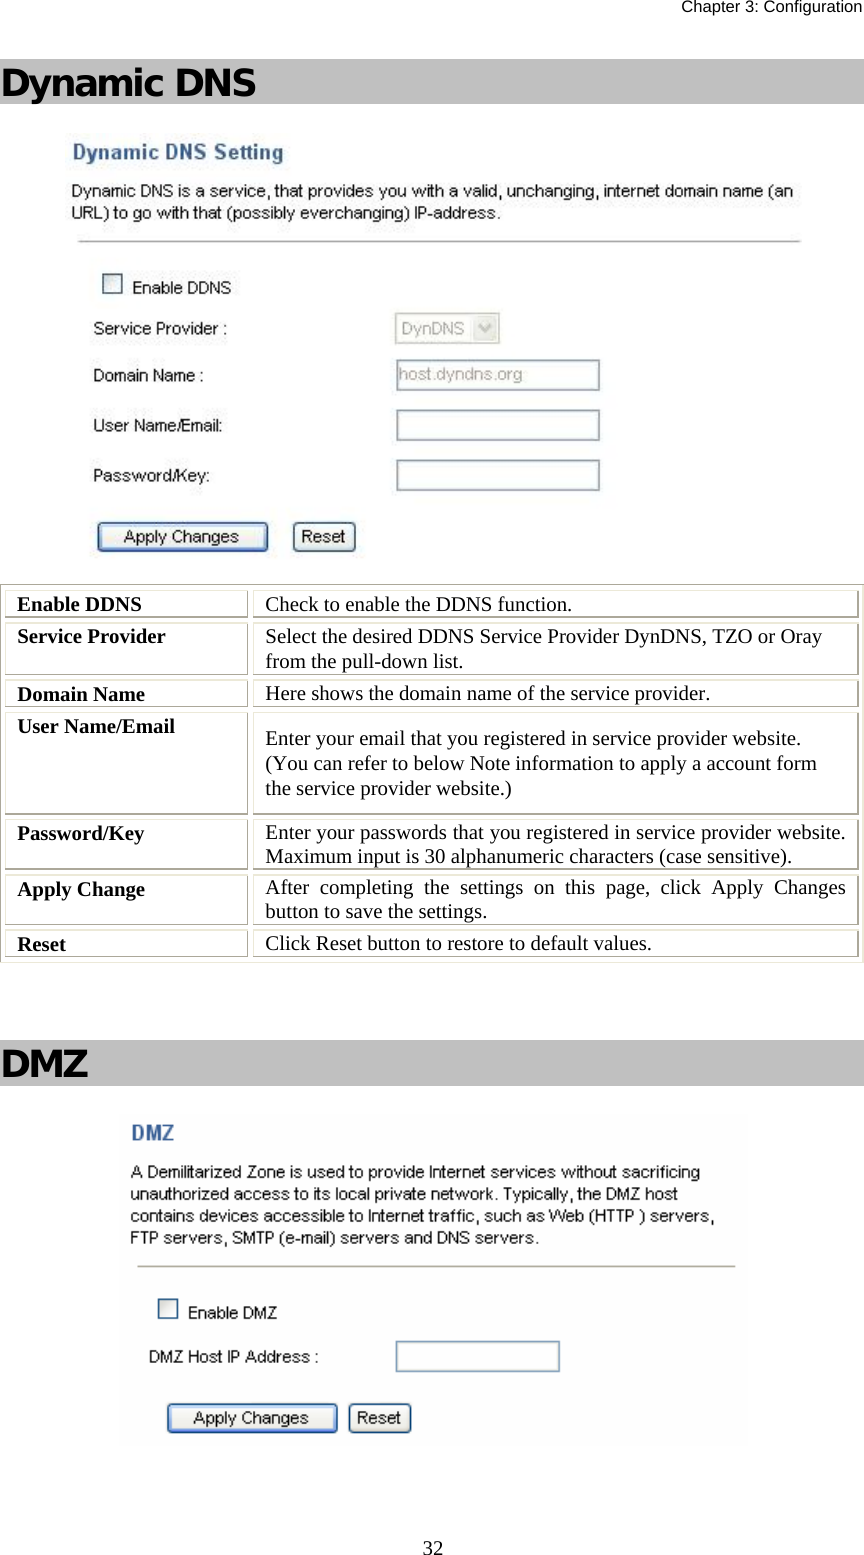   Chapter 3: Configuration  32Dynamic DNS   Enable DDNS  Check to enable the DDNS function. Service Provider  Select the desired DDNS Service Provider DynDNS, TZO or Oray from the pull-down list.  Domain Name  Here shows the domain name of the service provider. User Name/Email  Enter your email that you registered in service provider website. (You can refer to below Note information to apply a account form the service provider website.) Password/Key  Enter your passwords that you registered in service provider website. Maximum input is 30 alphanumeric characters (case sensitive). Apply Change  After completing the settings on this page, click Apply Changes button to save the settings. Reset  Click Reset button to restore to default values.   DMZ    